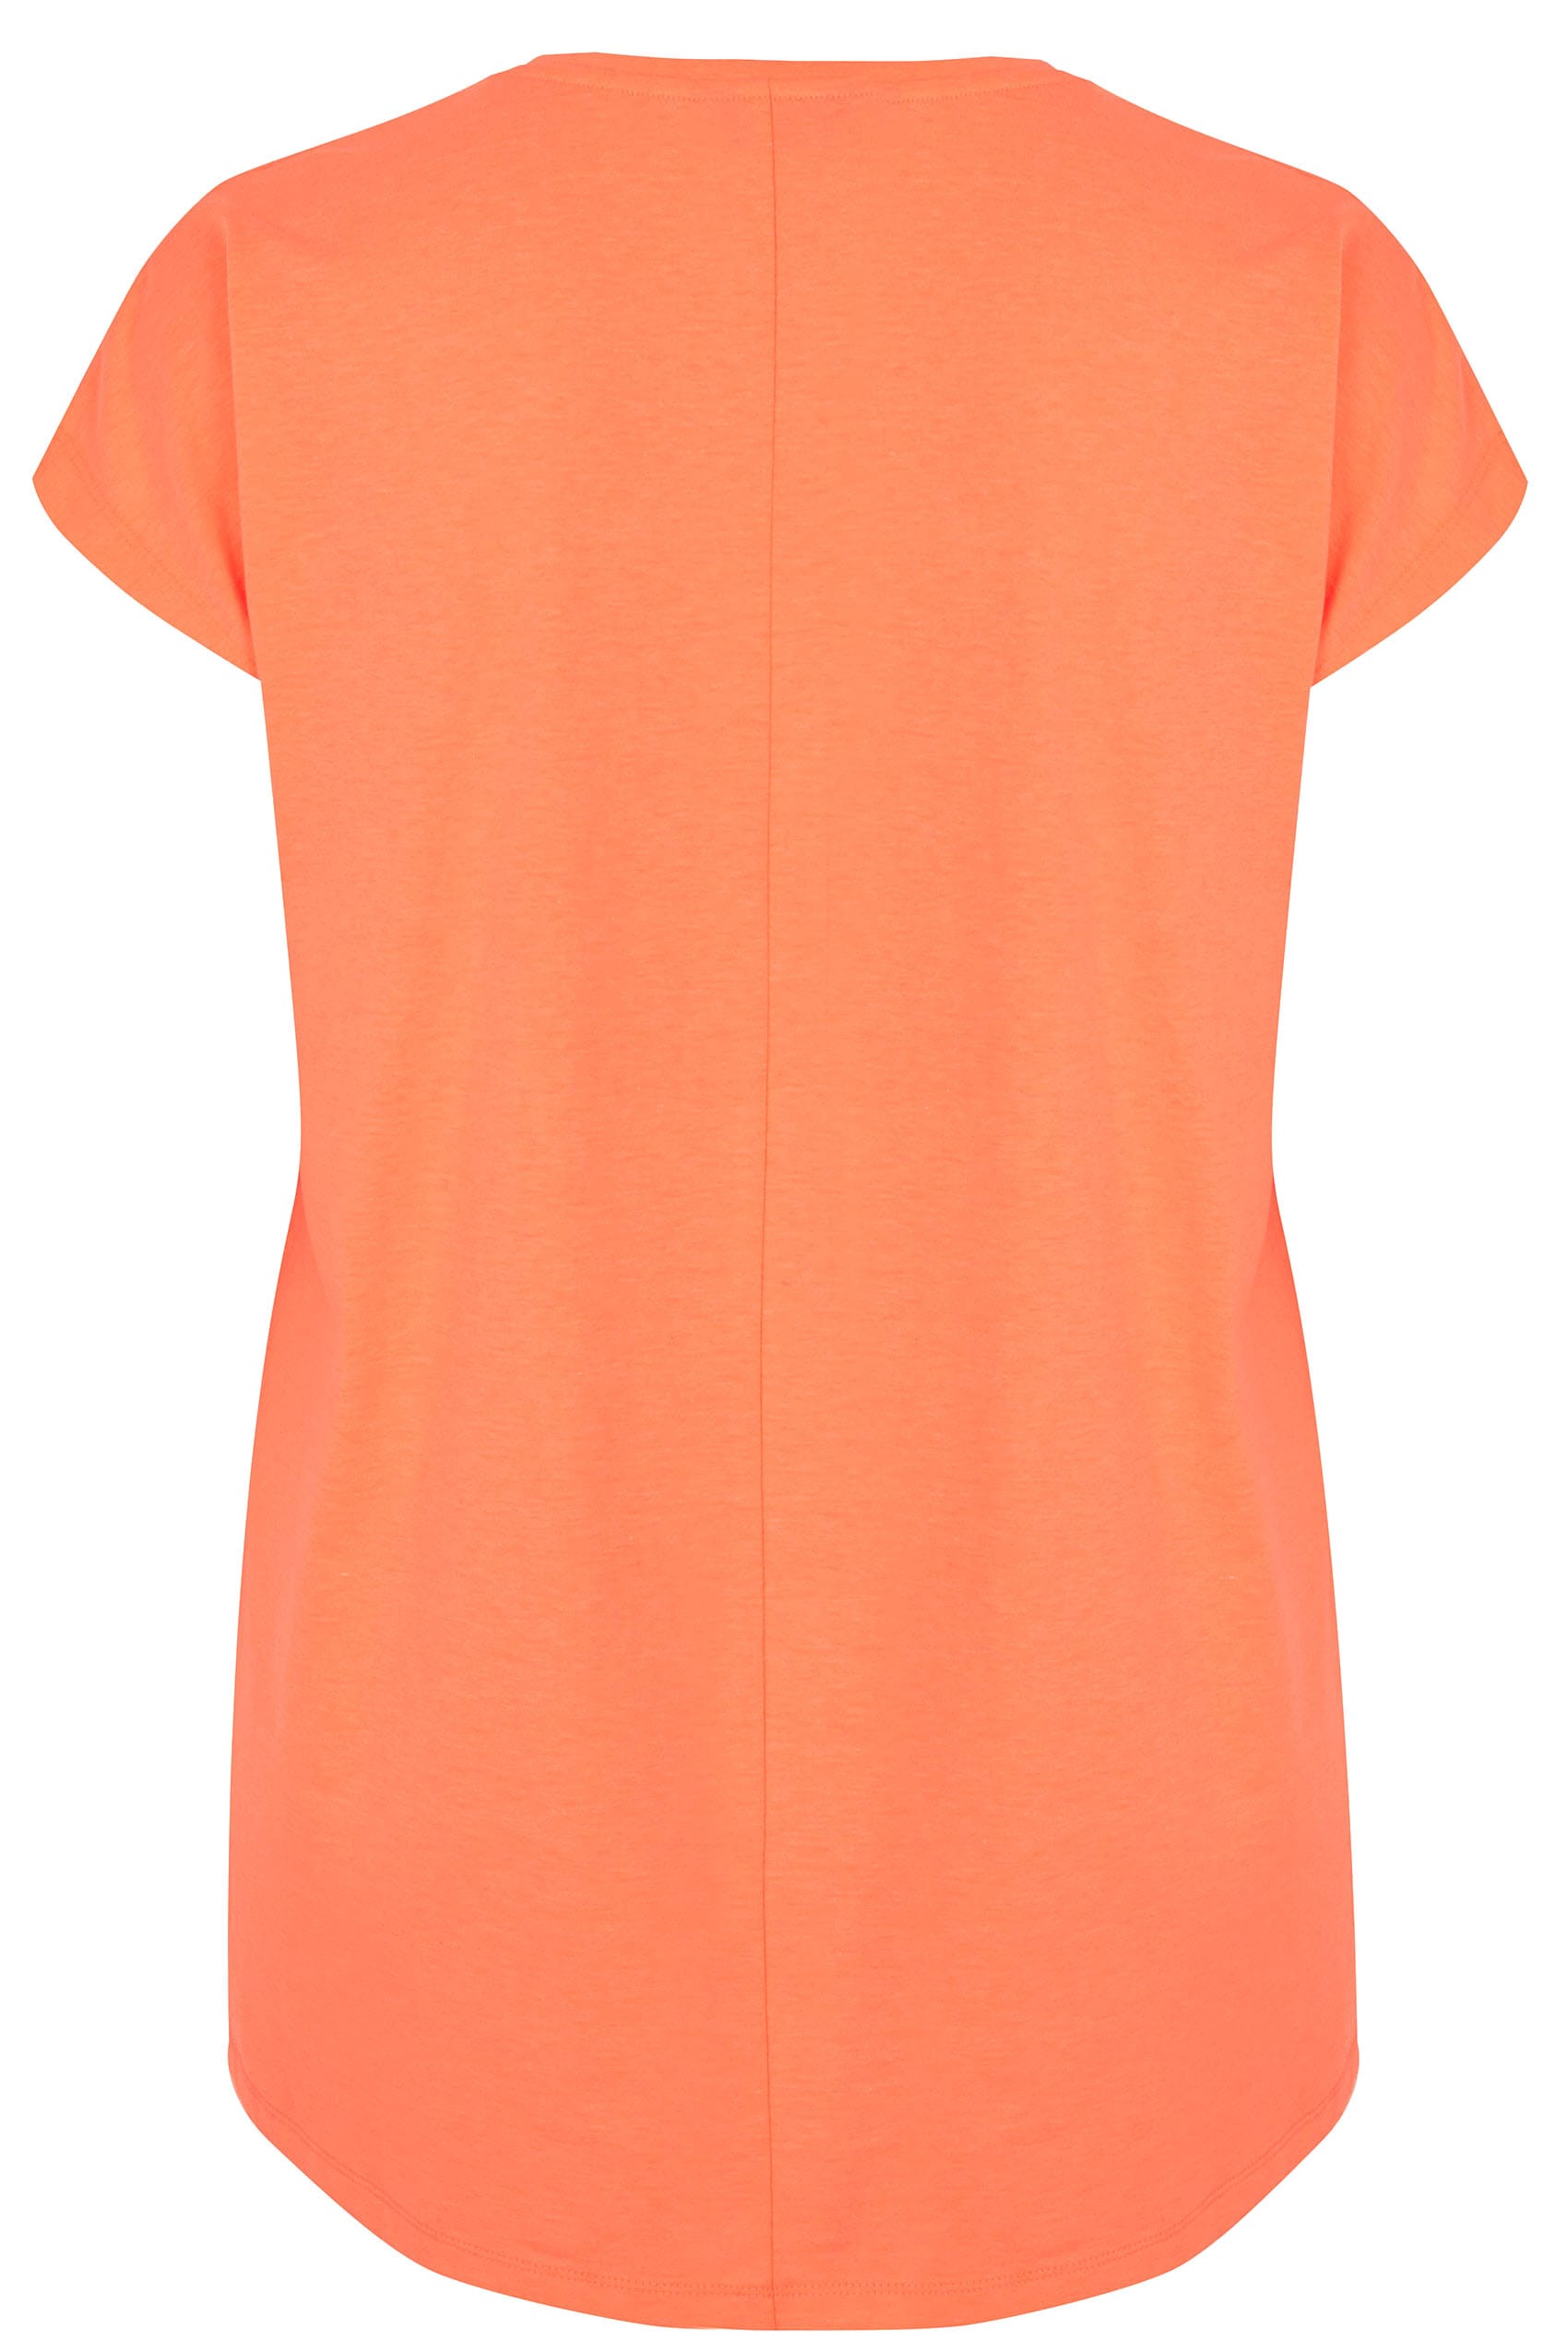 Neon Orange Star Studded Jersey T-Shirt With Curved Hem